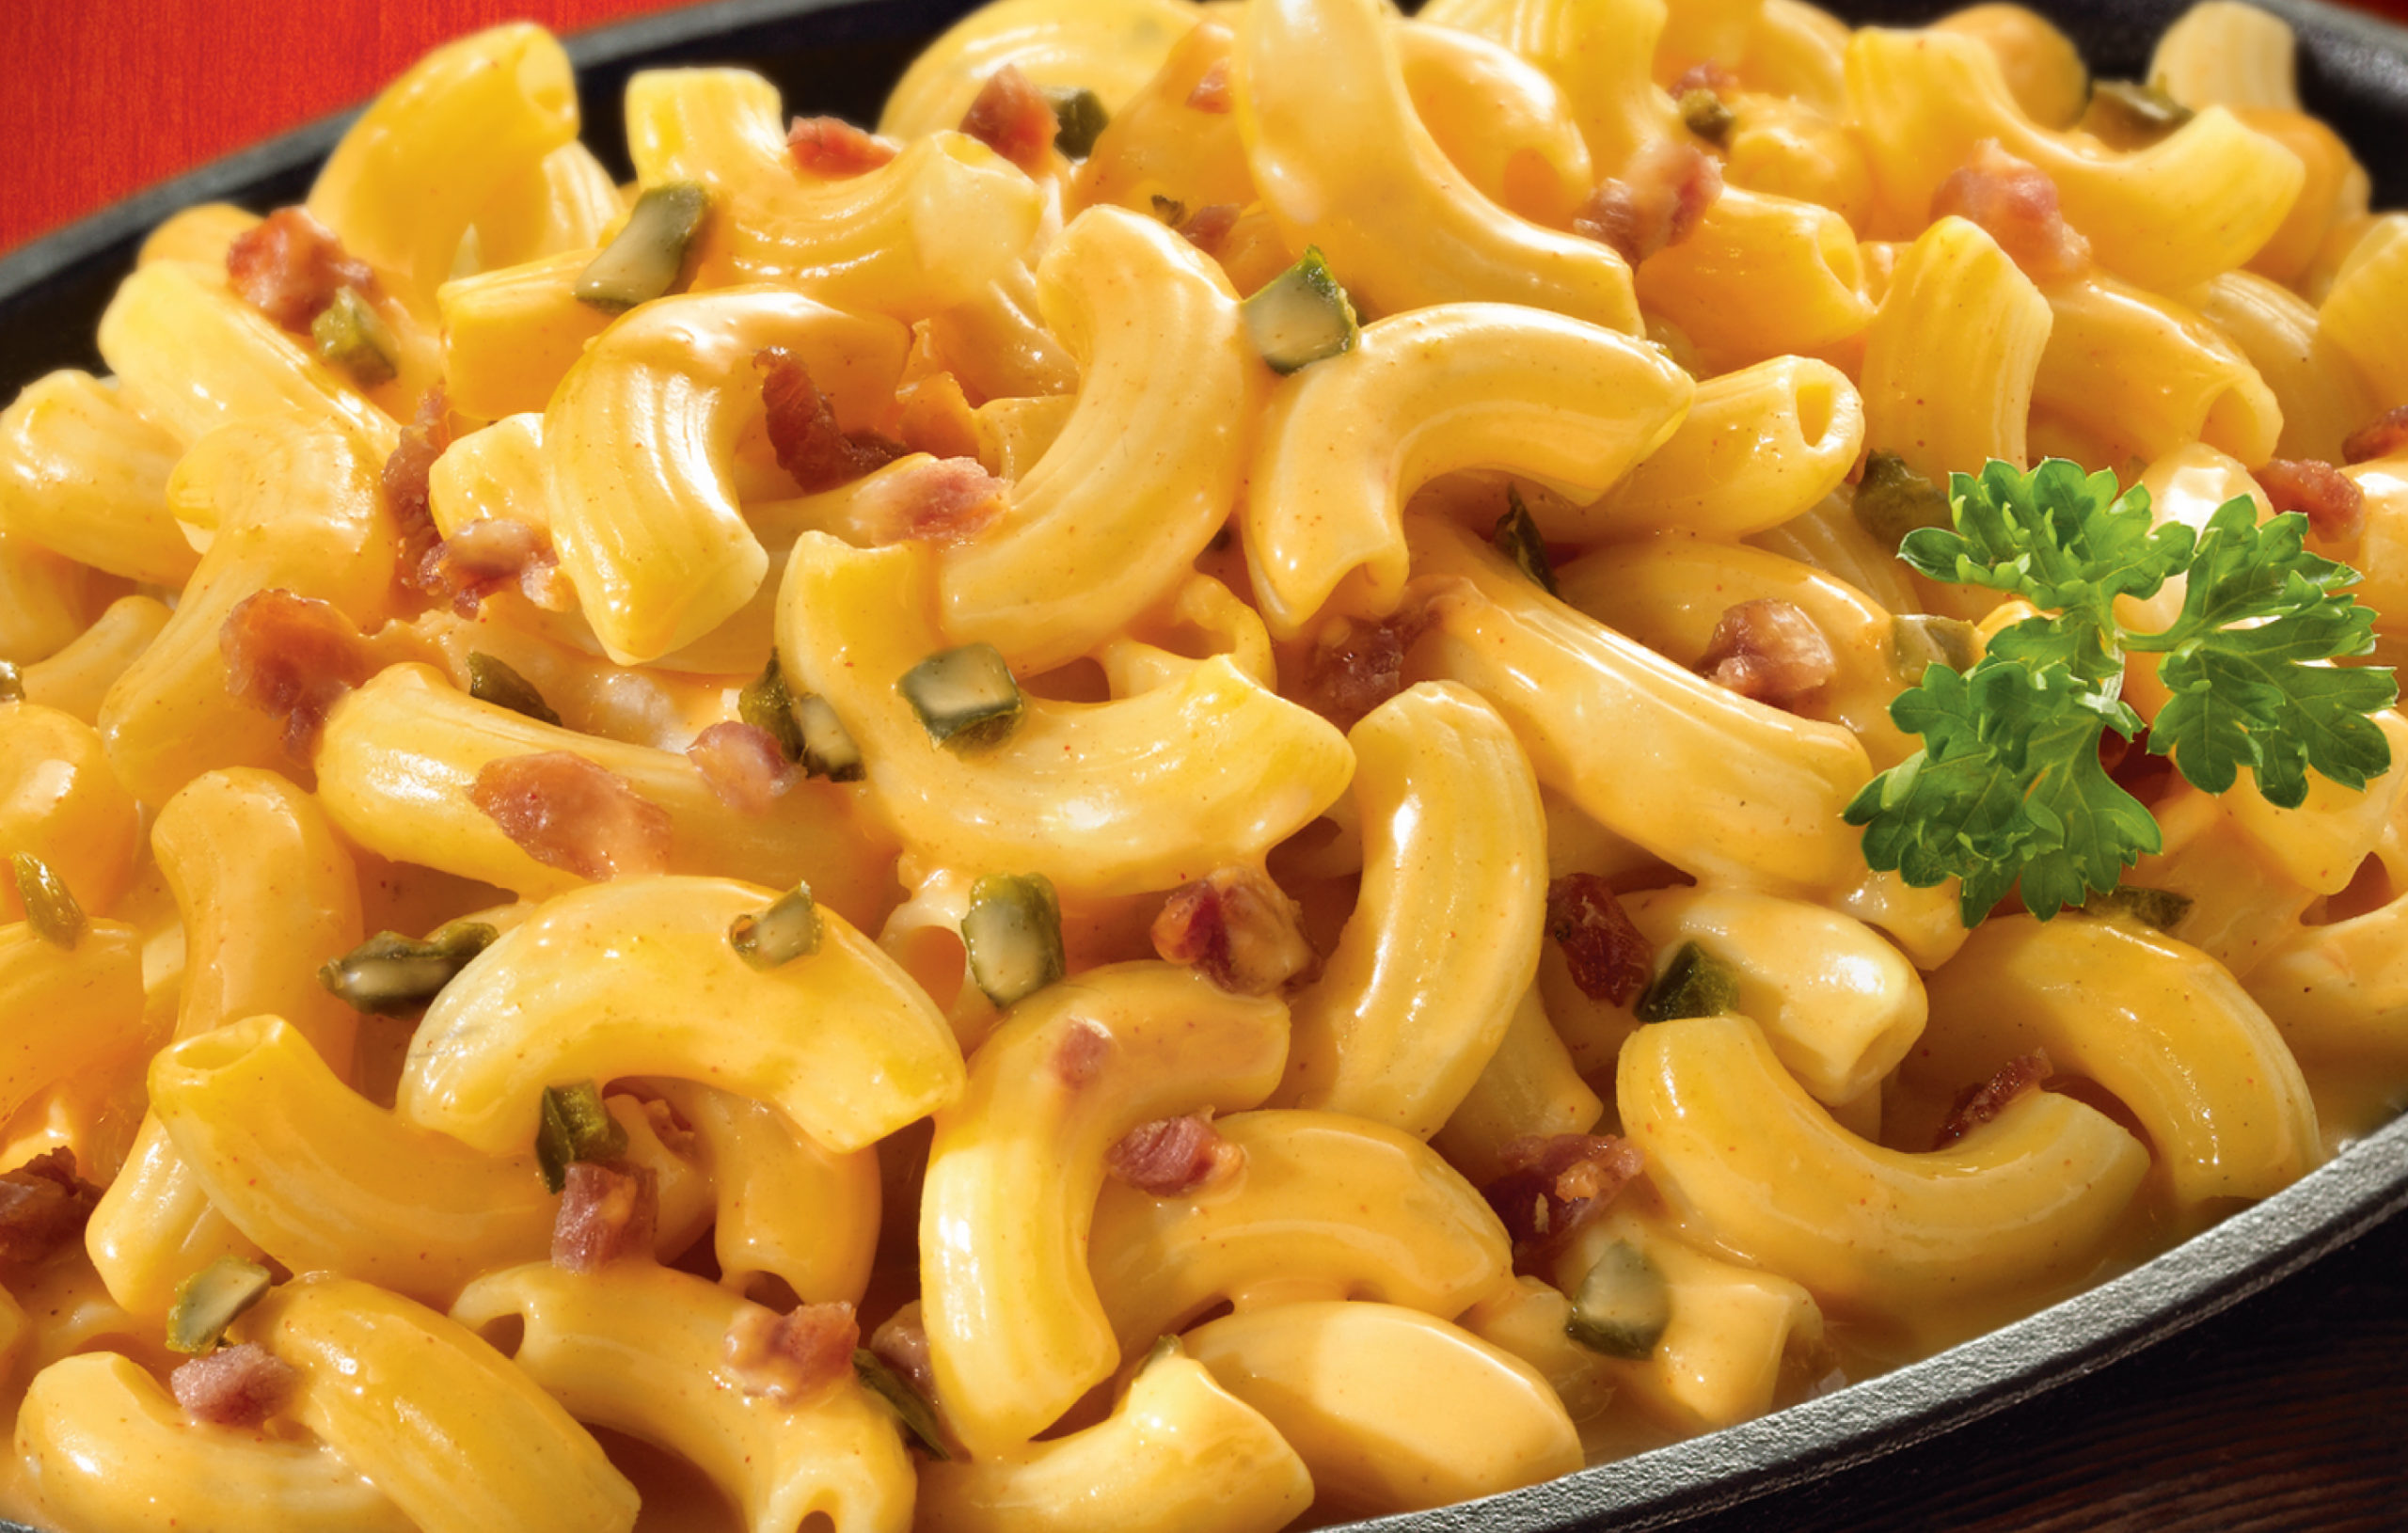 Mac And Cheese Has Been A Favorite Comfort Food For Centuries Easy Home Meals